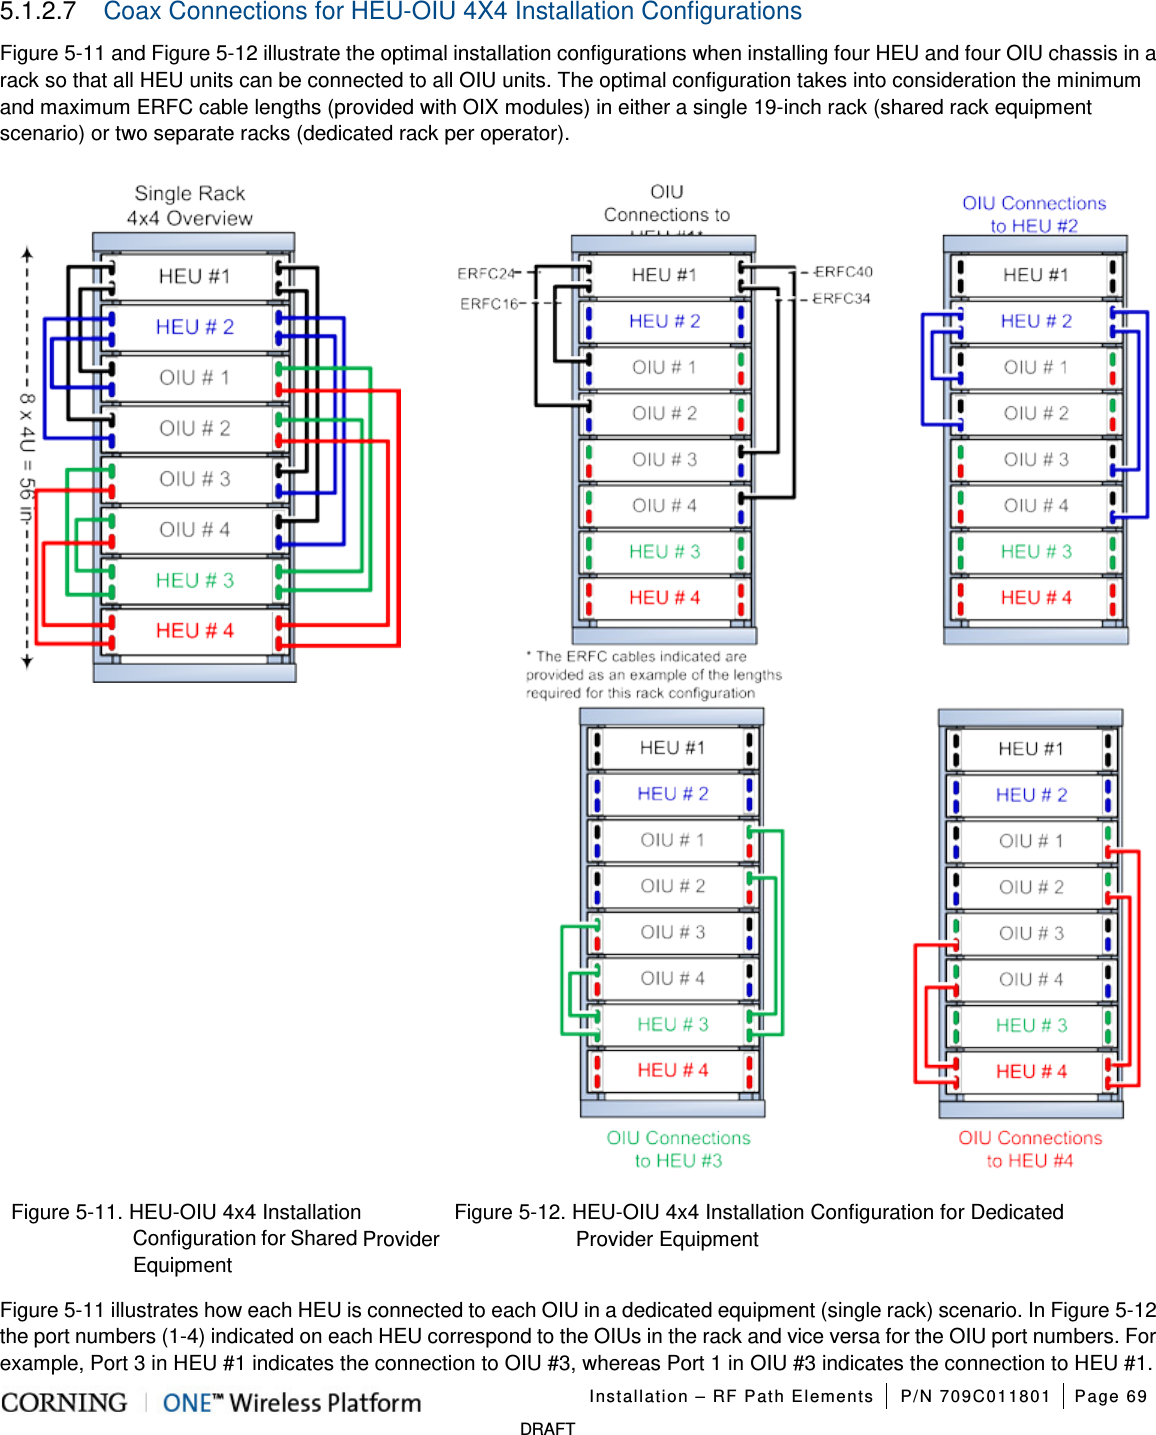   Installation – RF Path Elements P/N 709C011801 Page 69   DRAFT 5.1.2.7  Coax Connections for HEU-OIU 4X4 Installation Configurations Figure  5-11 and Figure  5-12 illustrate the optimal installation configurations when installing four HEU and four OIU chassis in a rack so that all HEU units can be connected to all OIU units. The optimal configuration takes into consideration the minimum and maximum ERFC cable lengths (provided with OIX modules) in either a single 19-inch rack (shared rack equipment scenario) or two separate racks (dedicated rack per operator).    Figure  5-11. HEU-OIU 4x4 Installation Configuration for Shared Provider Equipment Figure  5-12. HEU-OIU 4x4 Installation Configuration for Dedicated   Provider Equipment Figure  5-11 illustrates how each HEU is connected to each OIU in a dedicated equipment (single rack) scenario. In Figure  5-12 the port numbers (1-4) indicated on each HEU correspond to the OIUs in the rack and vice versa for the OIU port numbers. For example, Port 3 in HEU #1 indicates the connection to OIU #3, whereas Port 1 in OIU #3 indicates the connection to HEU #1. 